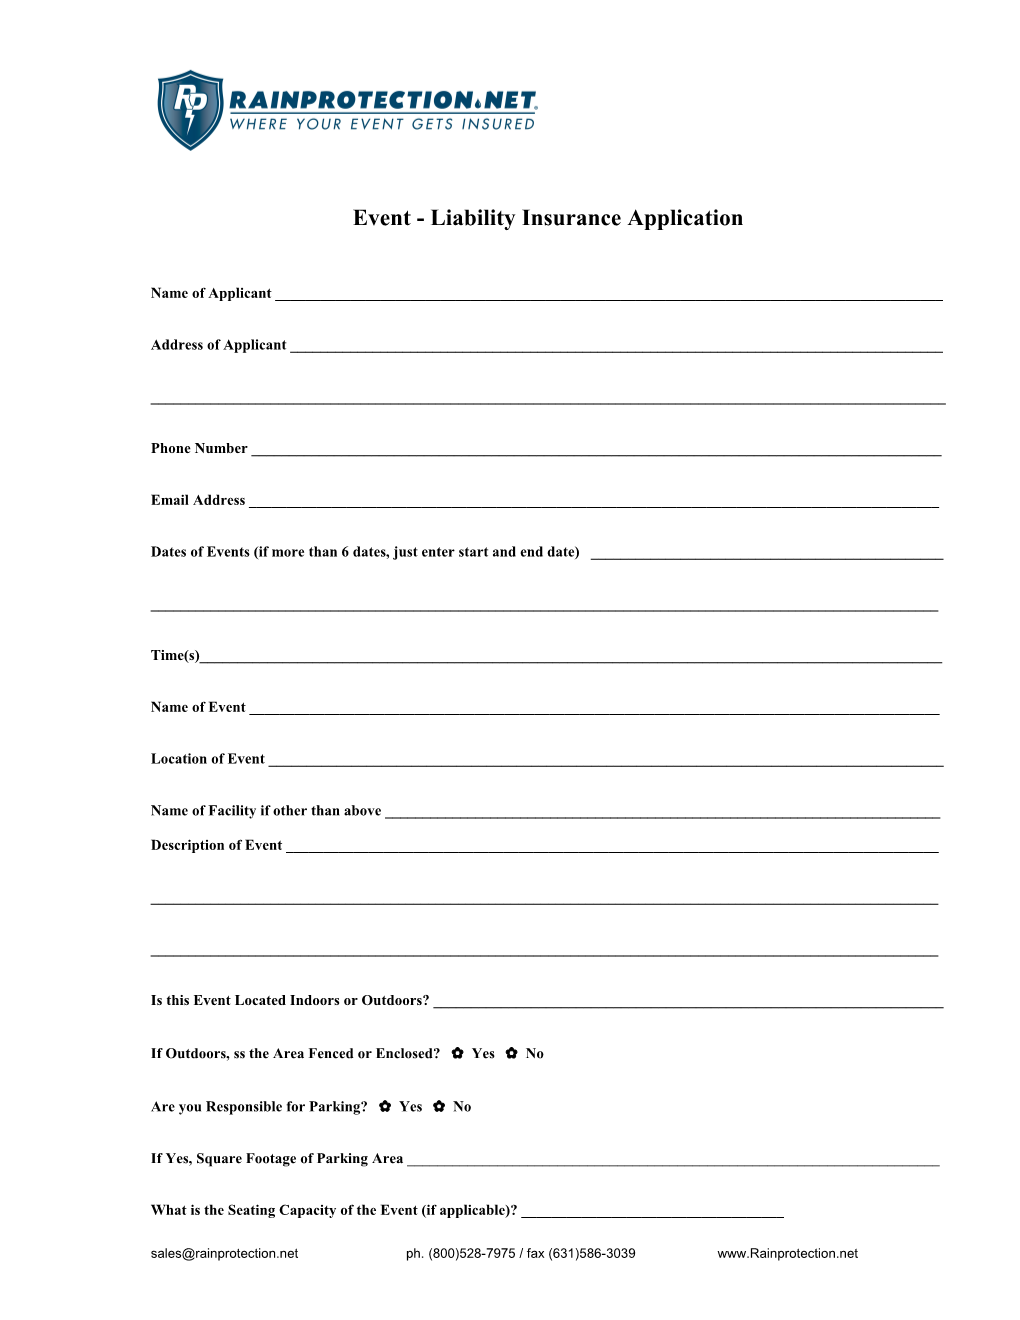 Event - Liability Insurance Application